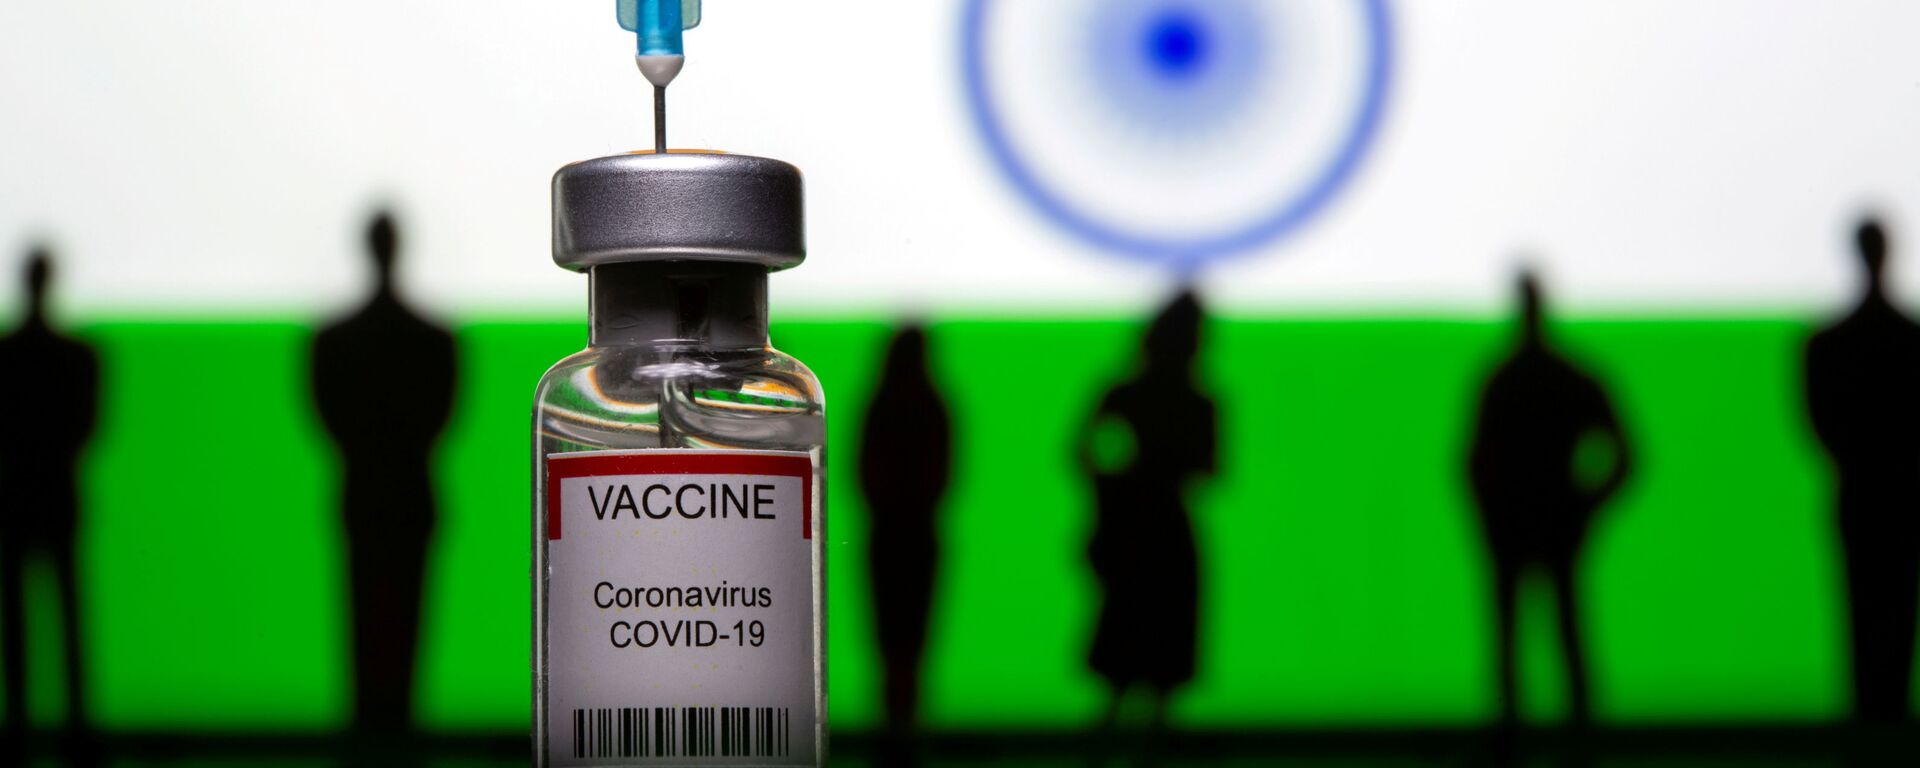 3D-printed small toy figurines, a syringe and vial labelled coronavirus disease (COVID-19) vaccine are seen in front of India flag - Sputnik International, 1920, 13.05.2021